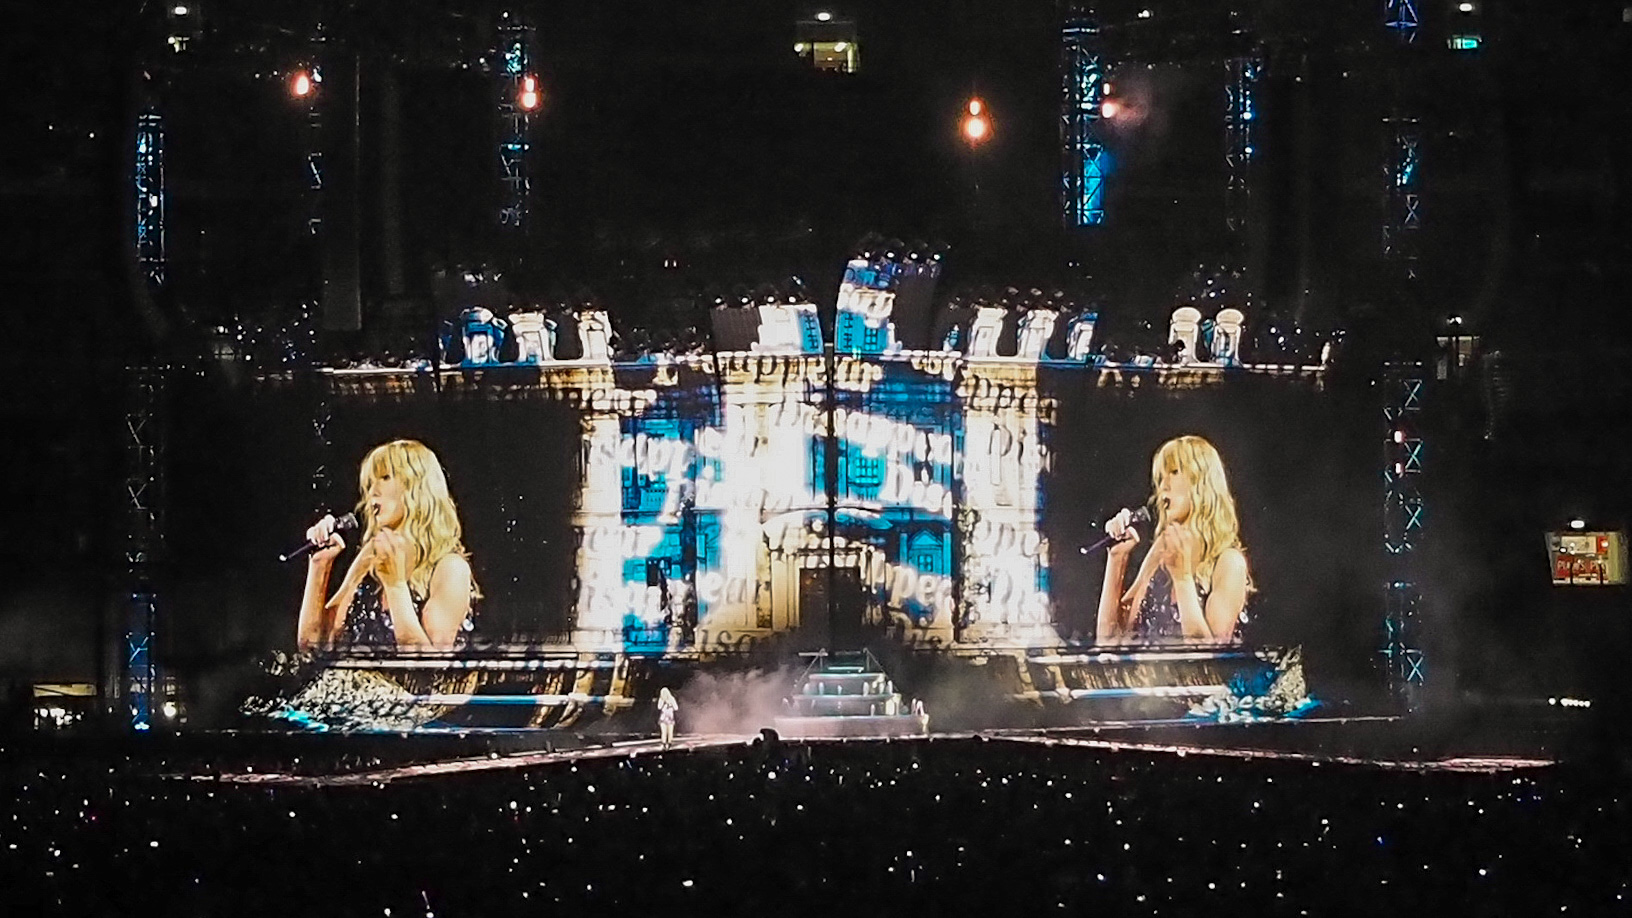 Taylor Swift's Reputation Stadium Tour London 2018. Wembley Stadium Stage, This Is Why We Can't Have Nice Things Tour Closer